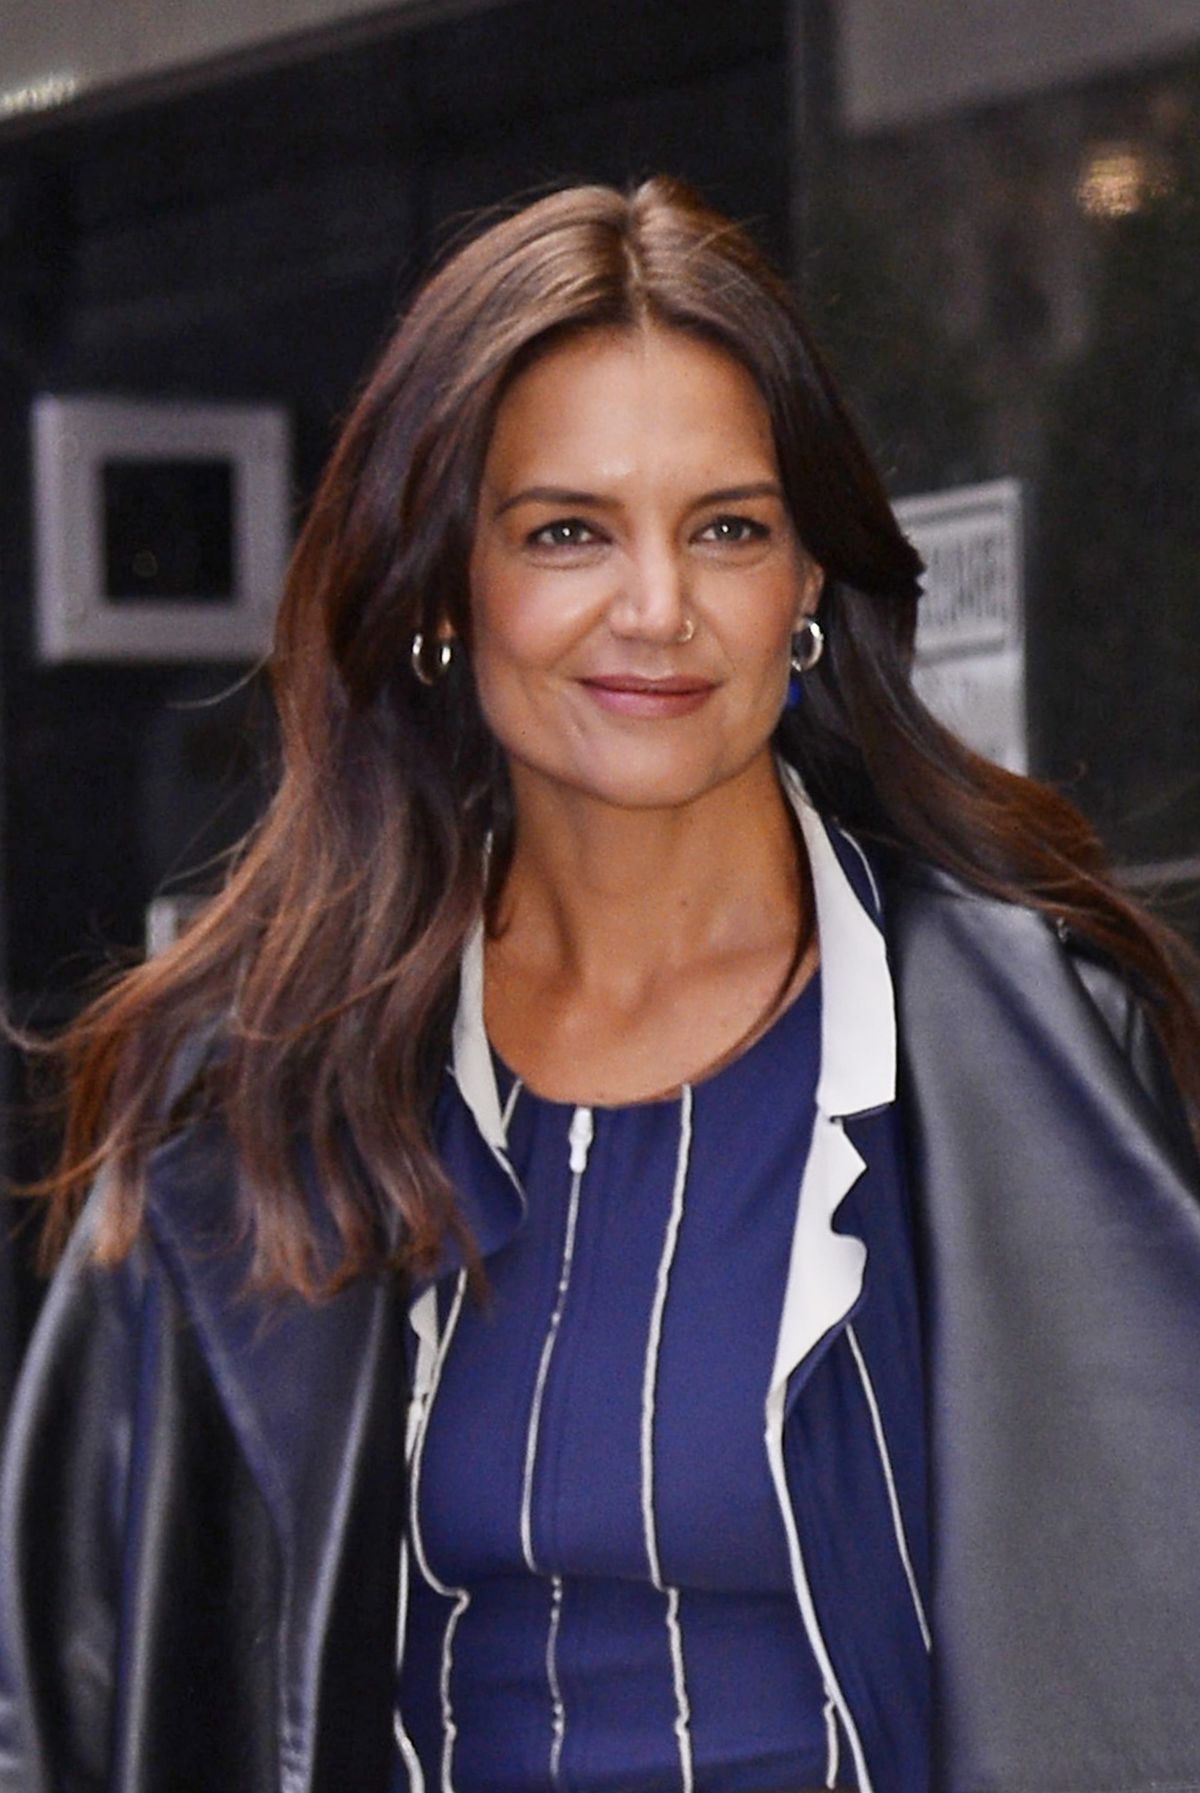 KATIE HOLMES Promotes Her New offBroadway play The Wanderers in New